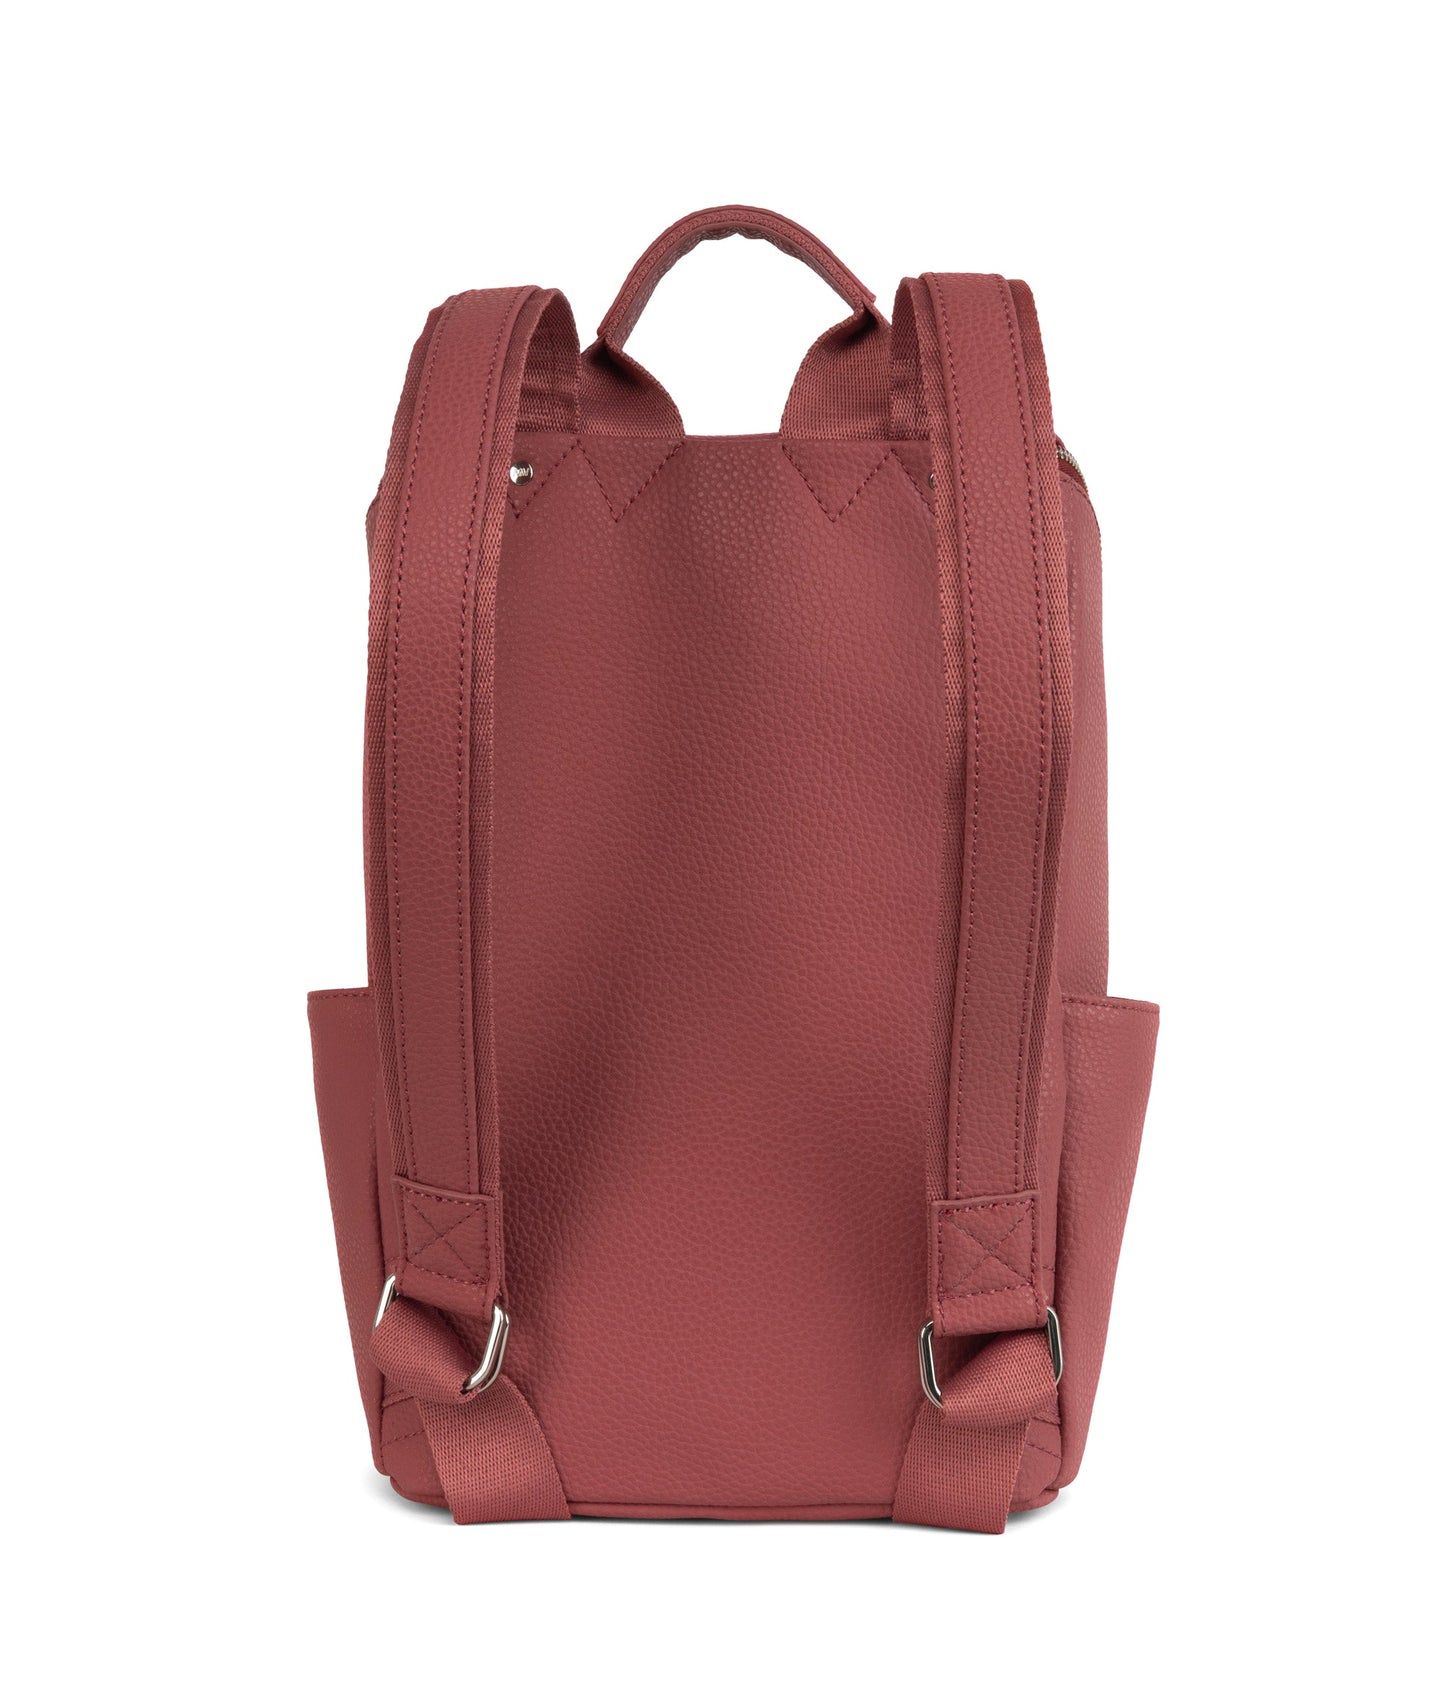 BRAVE Vegan Crossbody Bag - Purity | Color: Red - variant::lychee